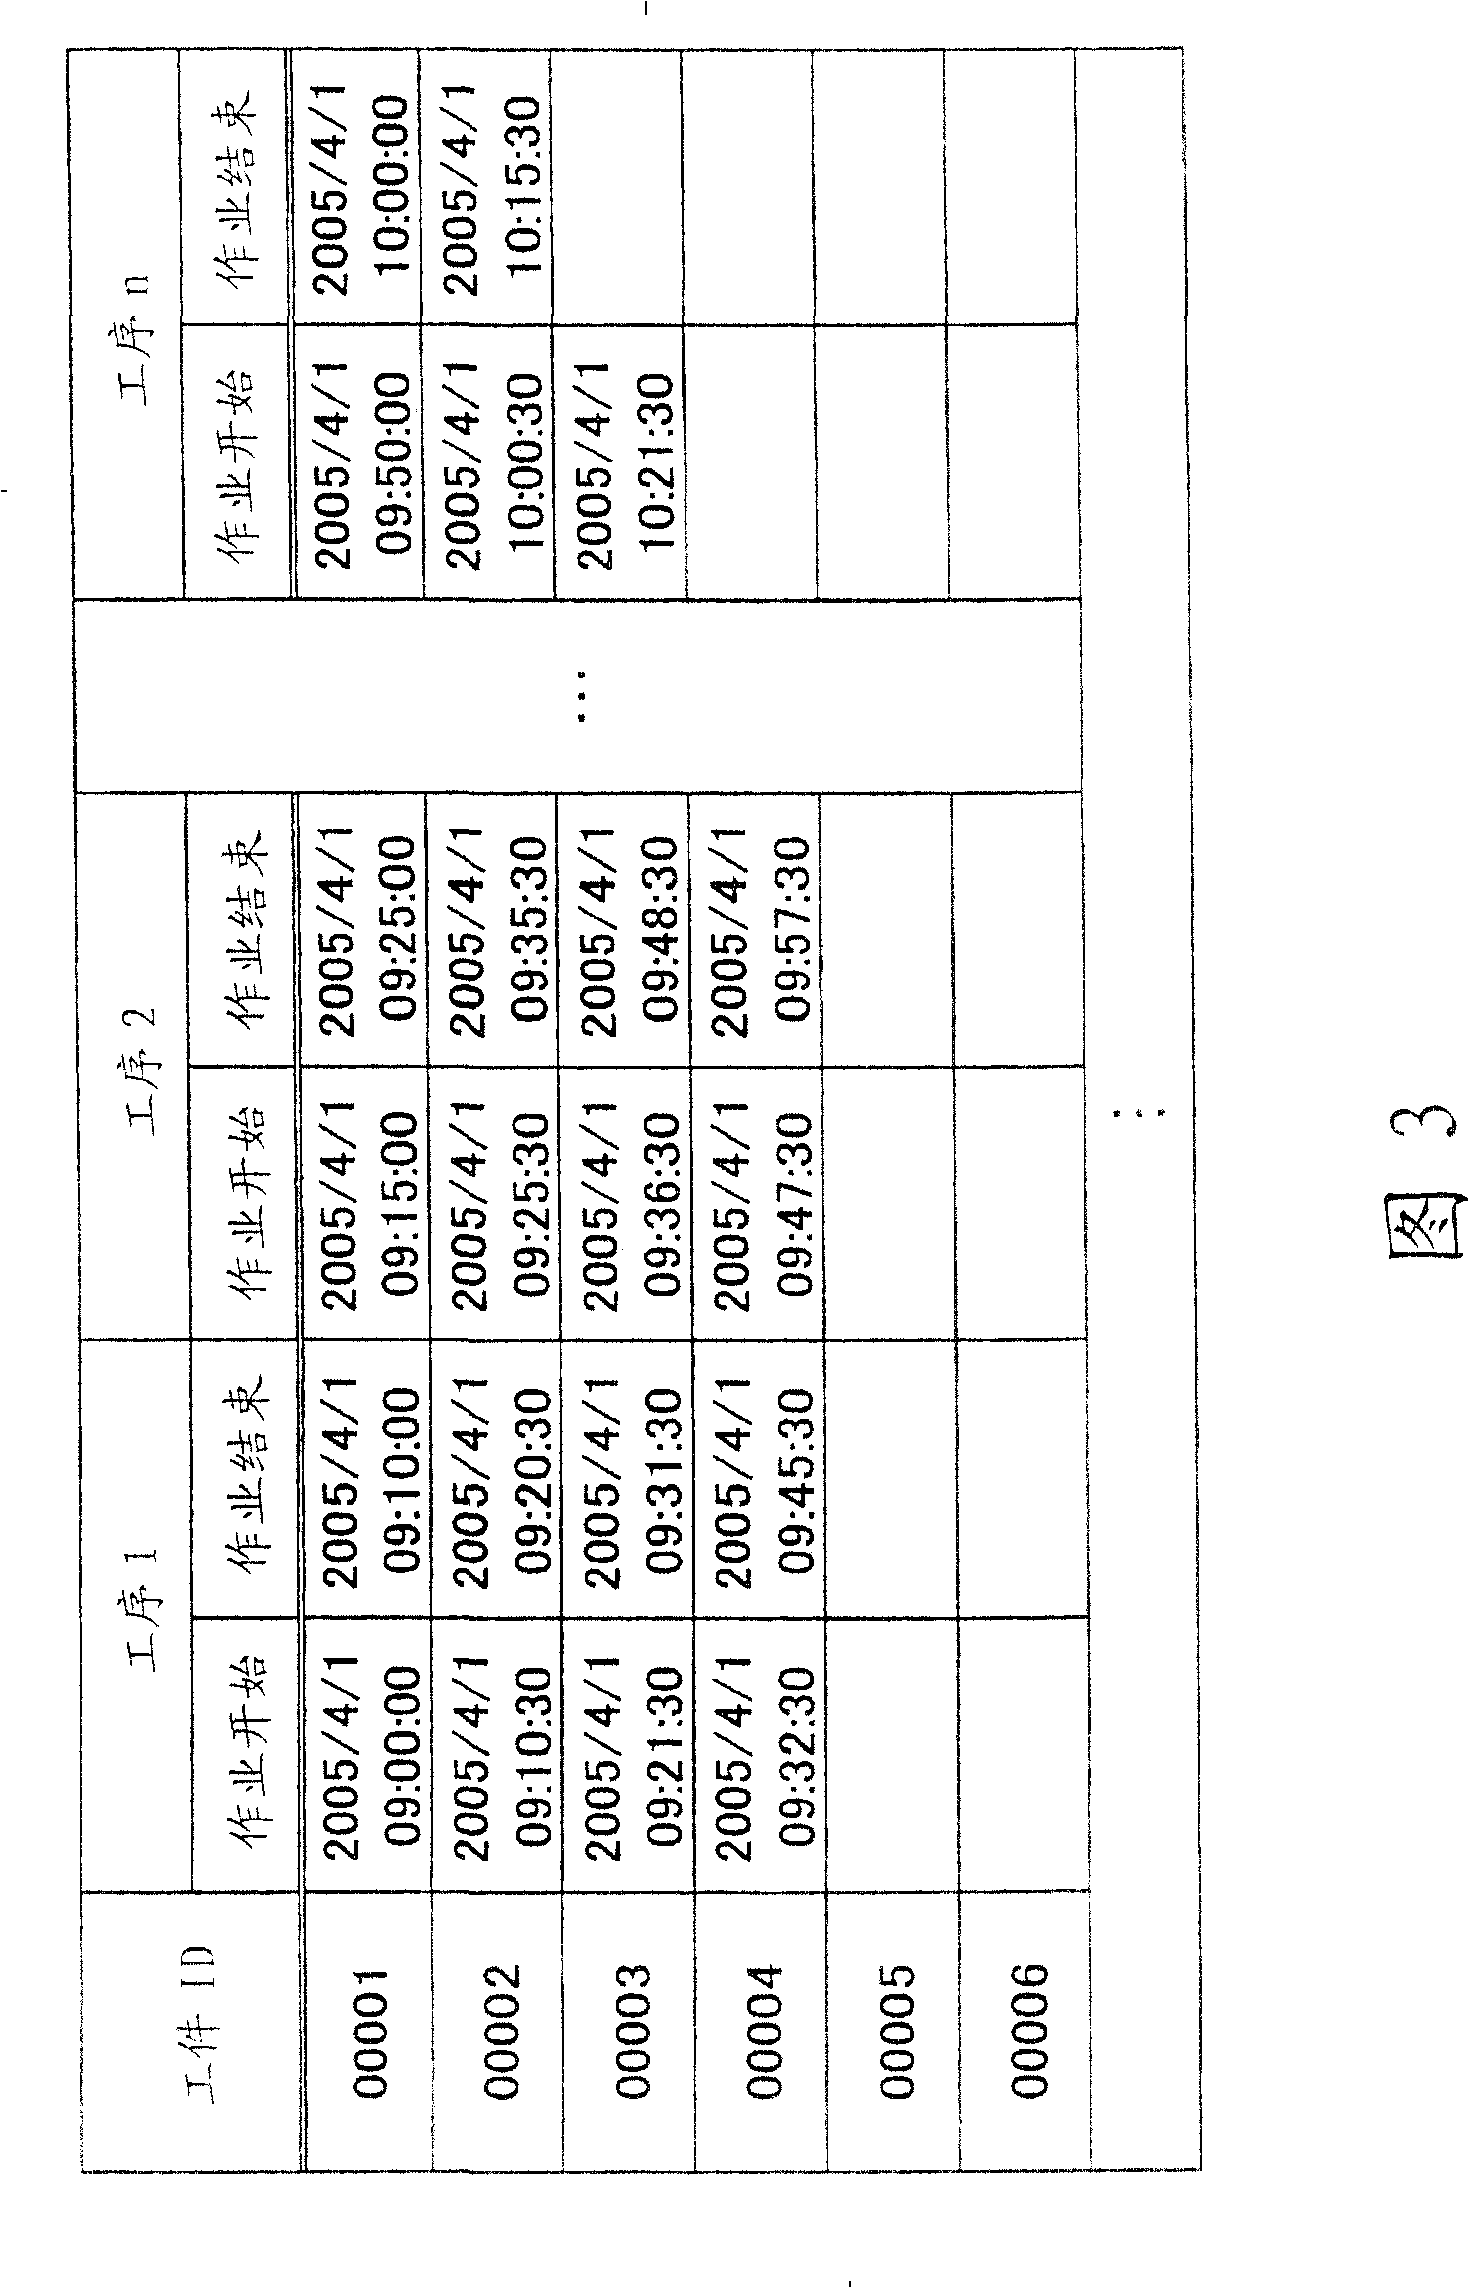 Production management device, method and system